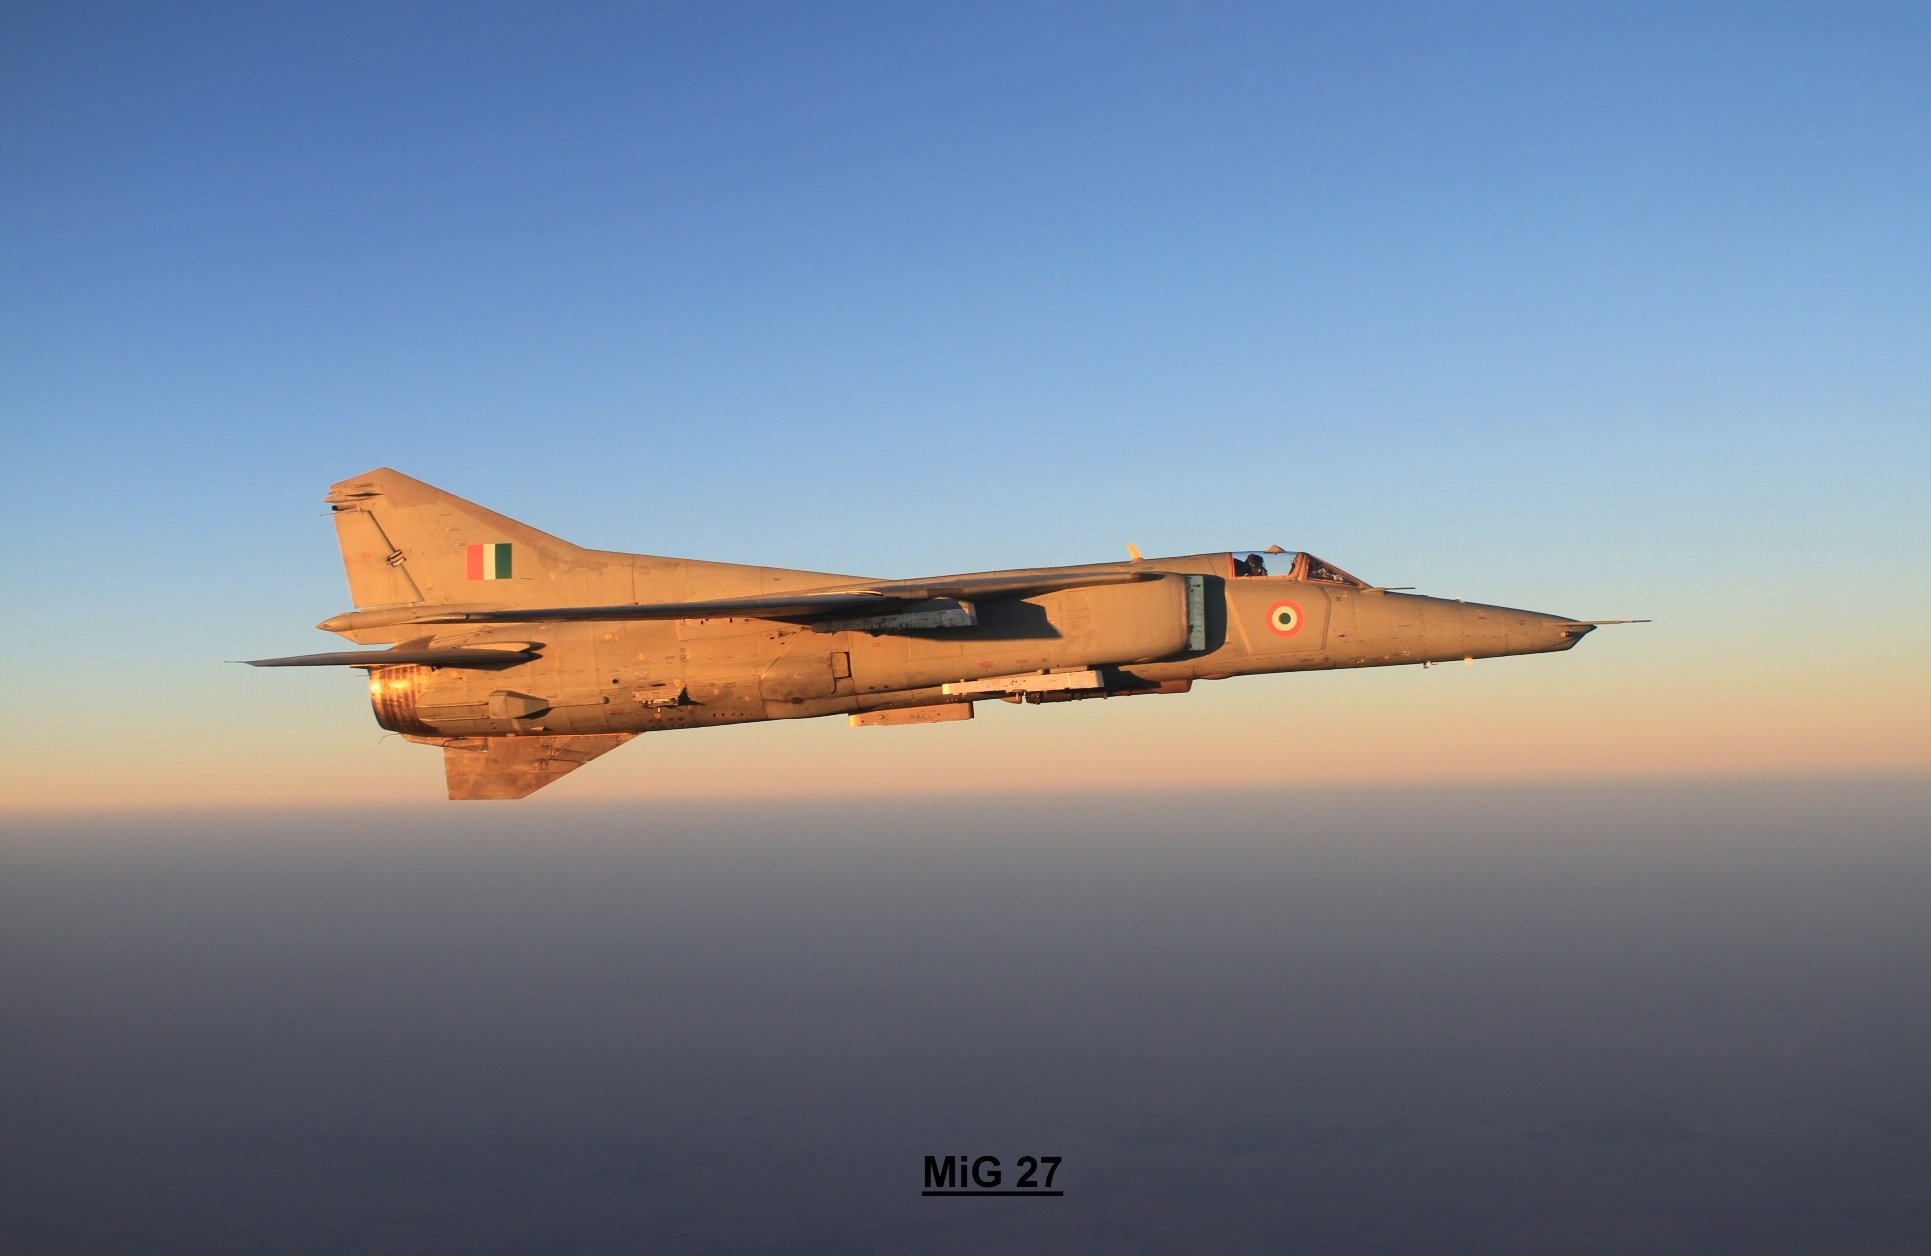 mig 27, Fighter, Jet, Russian, Airplane, Plane, Military, Mig,  12 Wallpaper